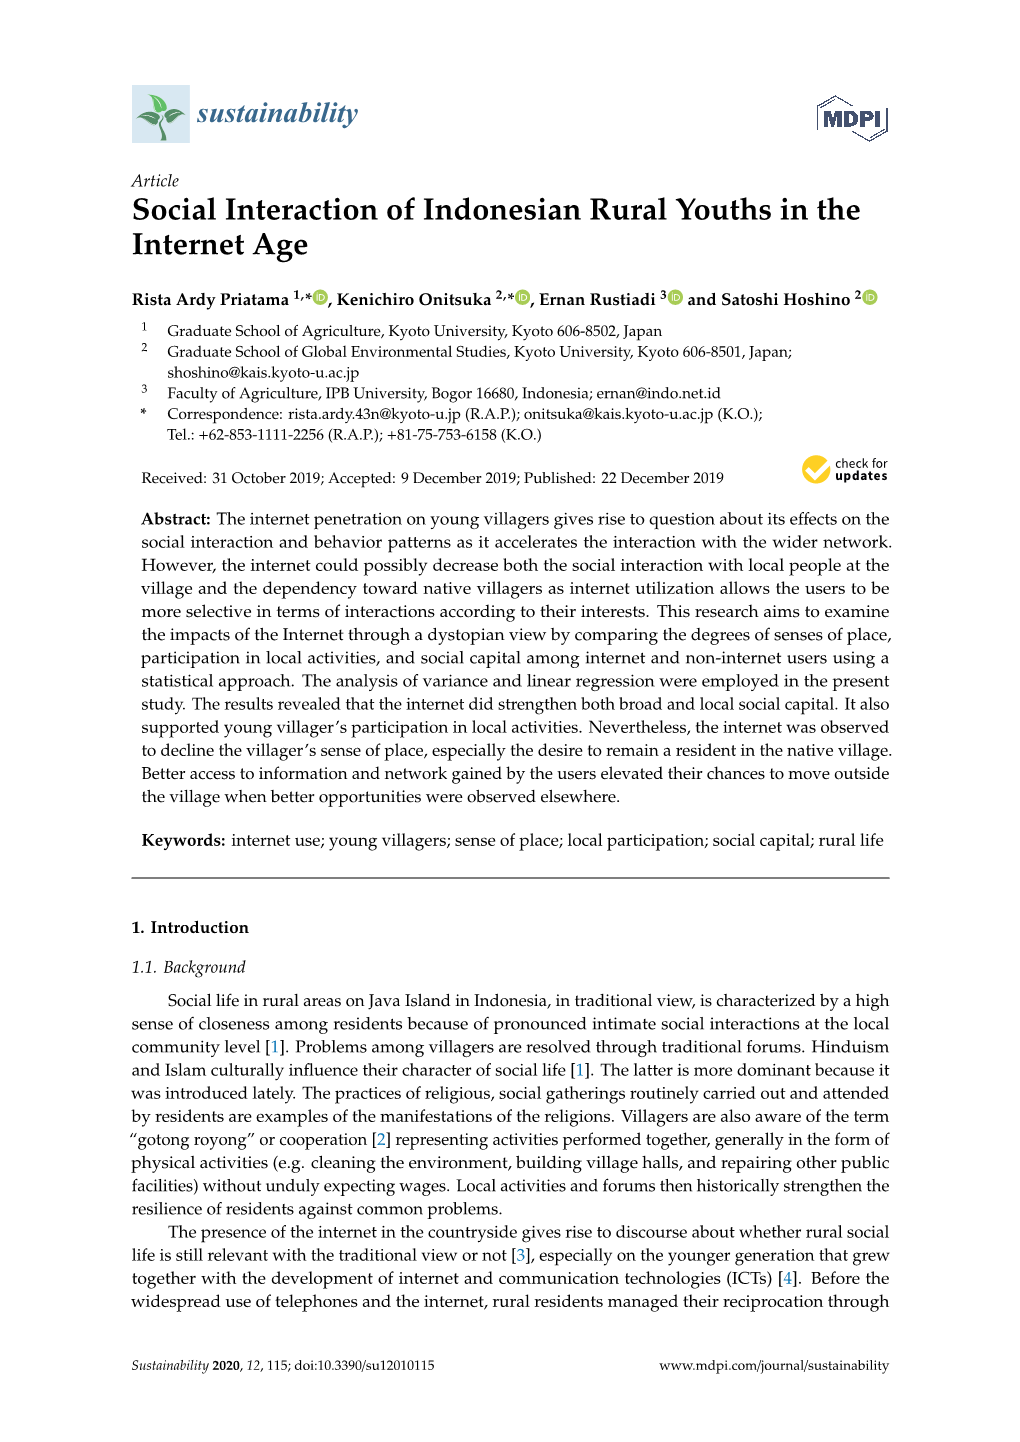 Social Interaction of Indonesian Rural Youths in the Internet Age